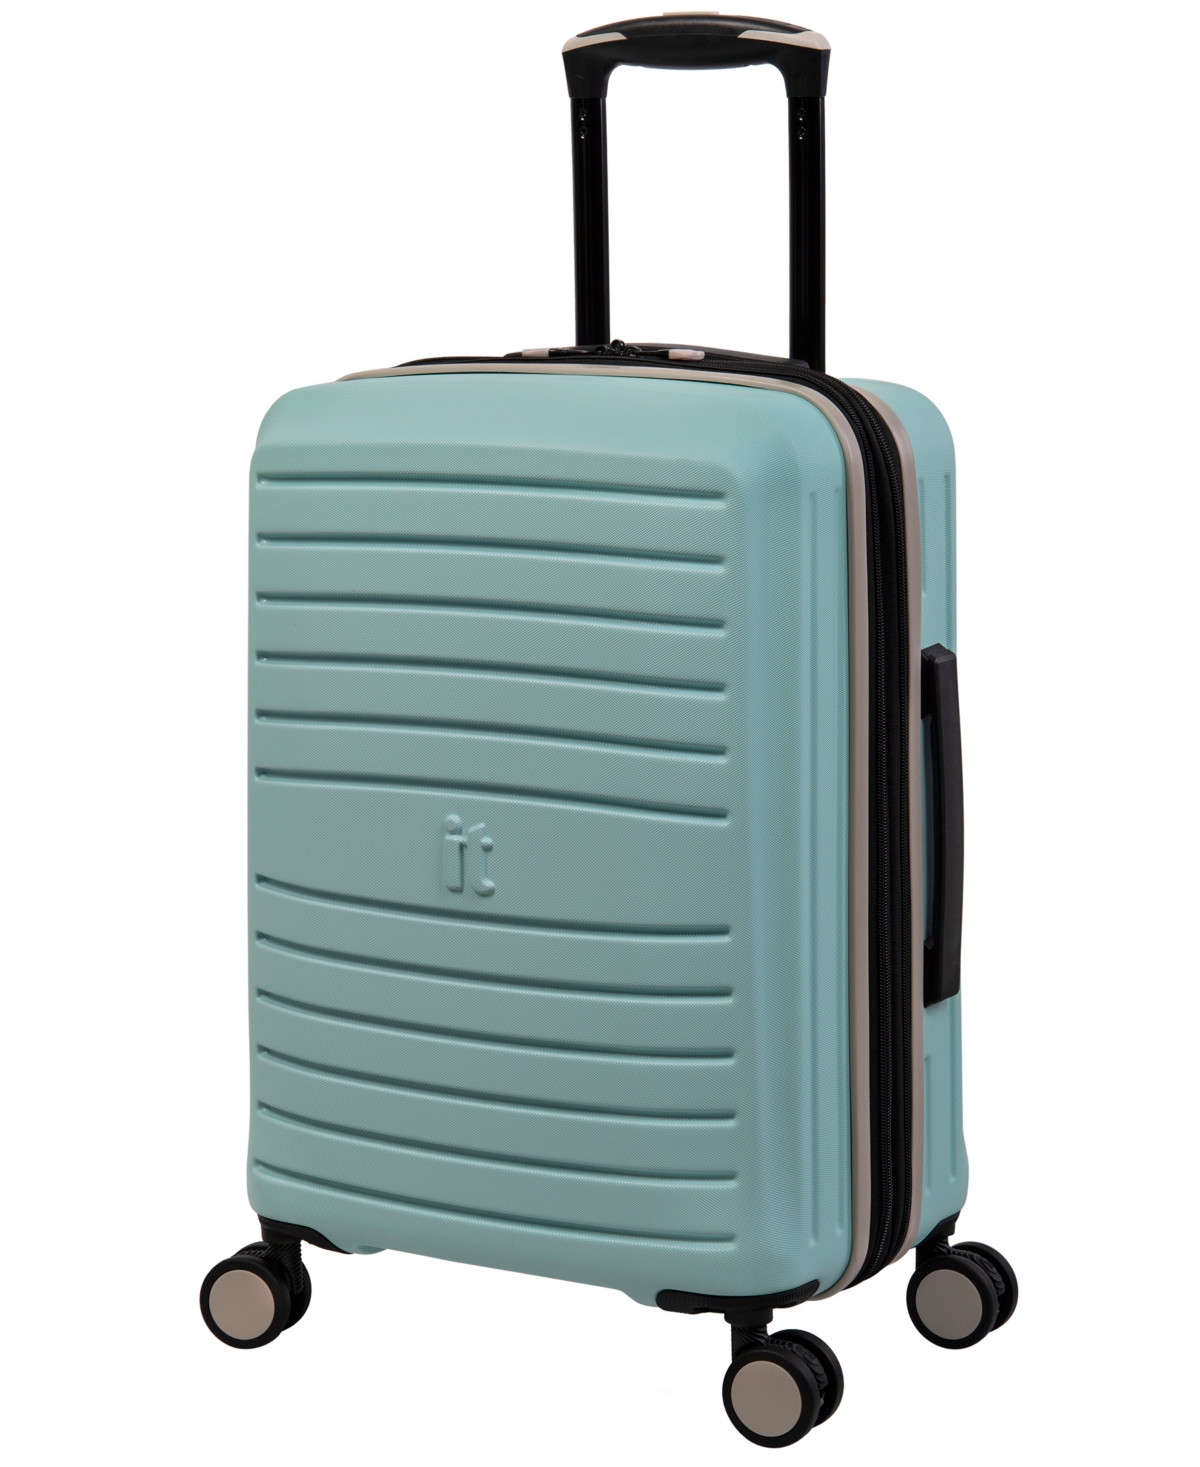 It Luggage 19" Hardside 8-wheel Expandable Spinner Carry-on Luggage In Mint Eggshell